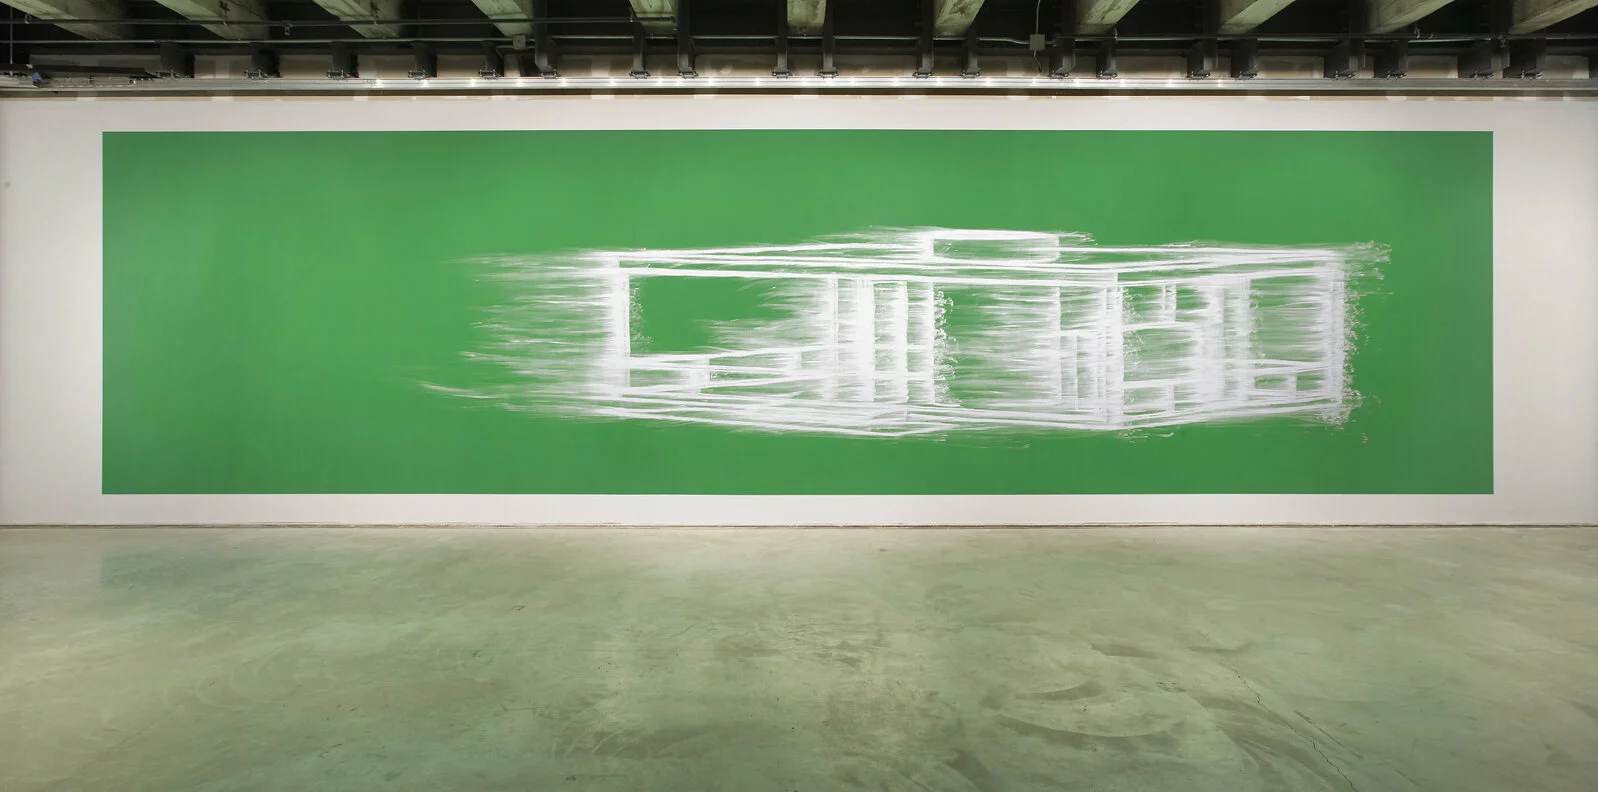 A wide green artwork featuring a smeared white line drawing hangs on a white wall in an industrial-style space.